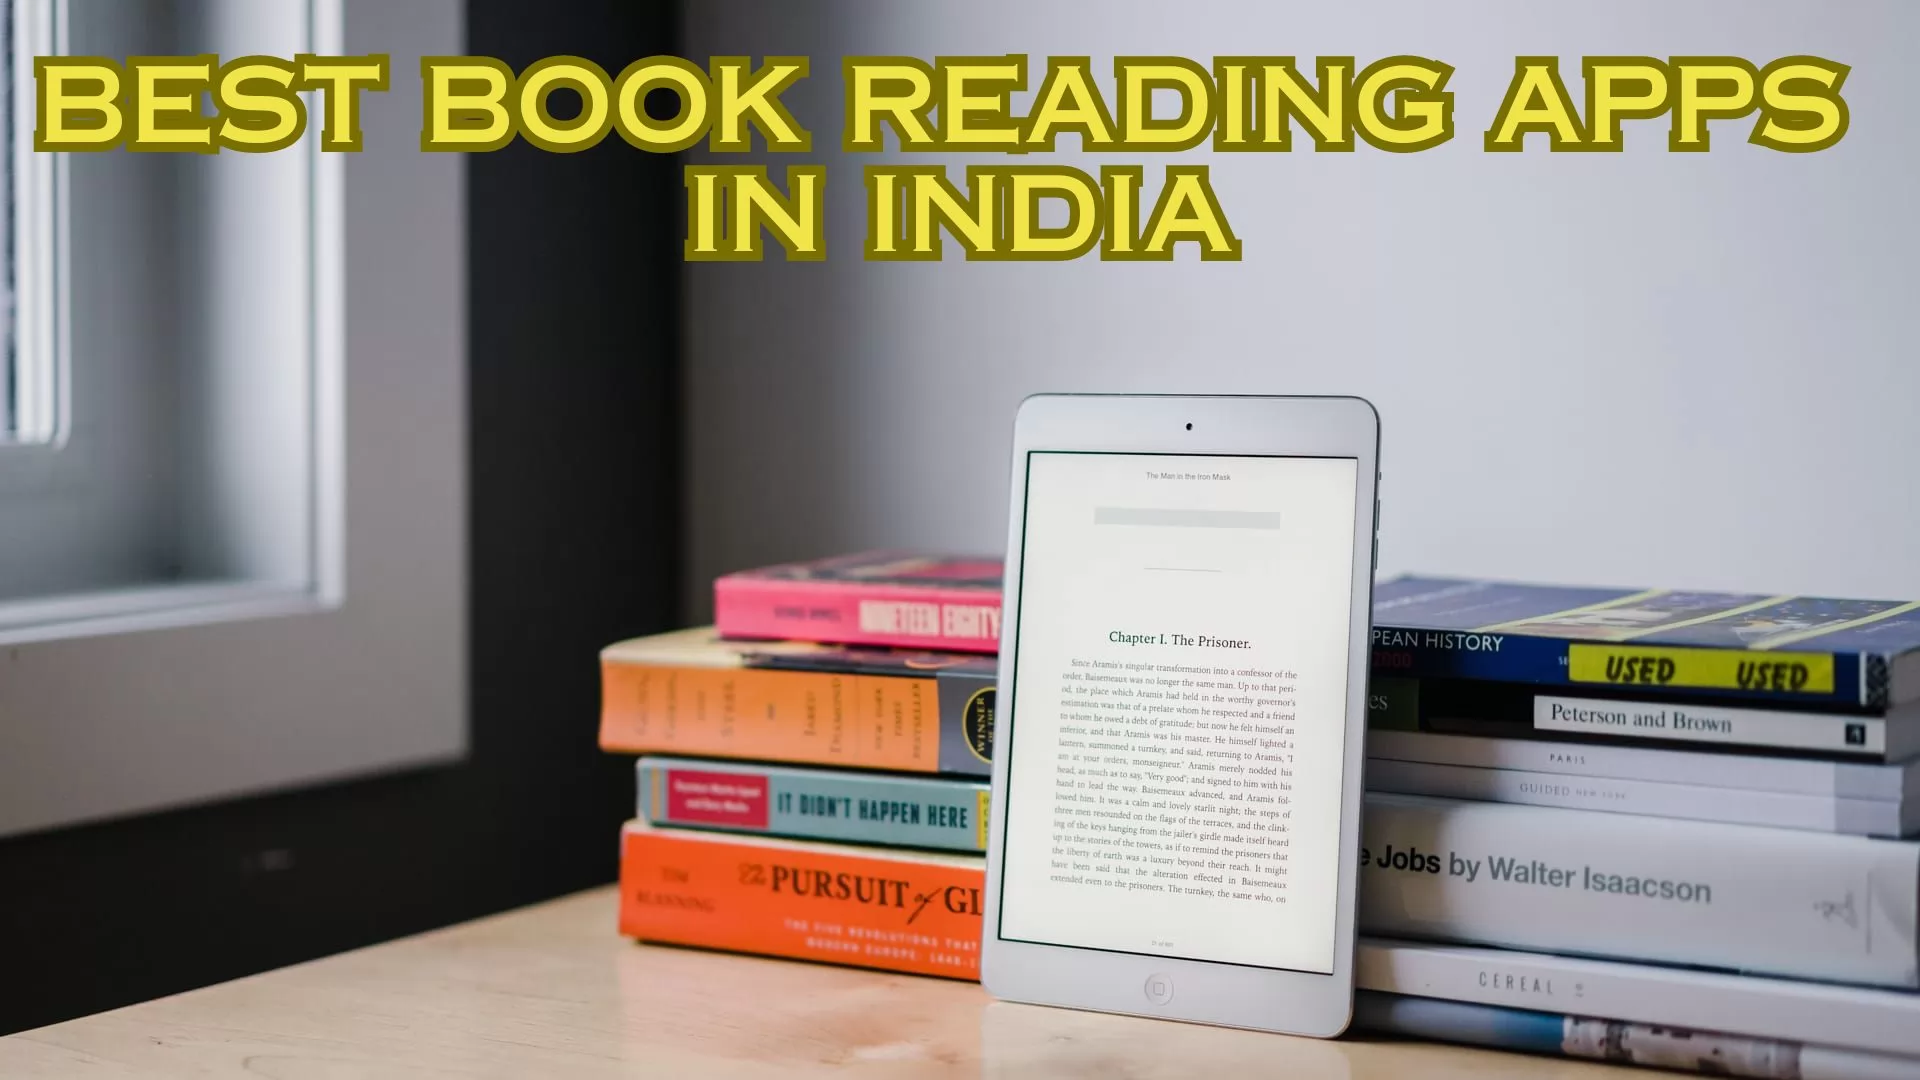 16 Best Book Reading Apps in India